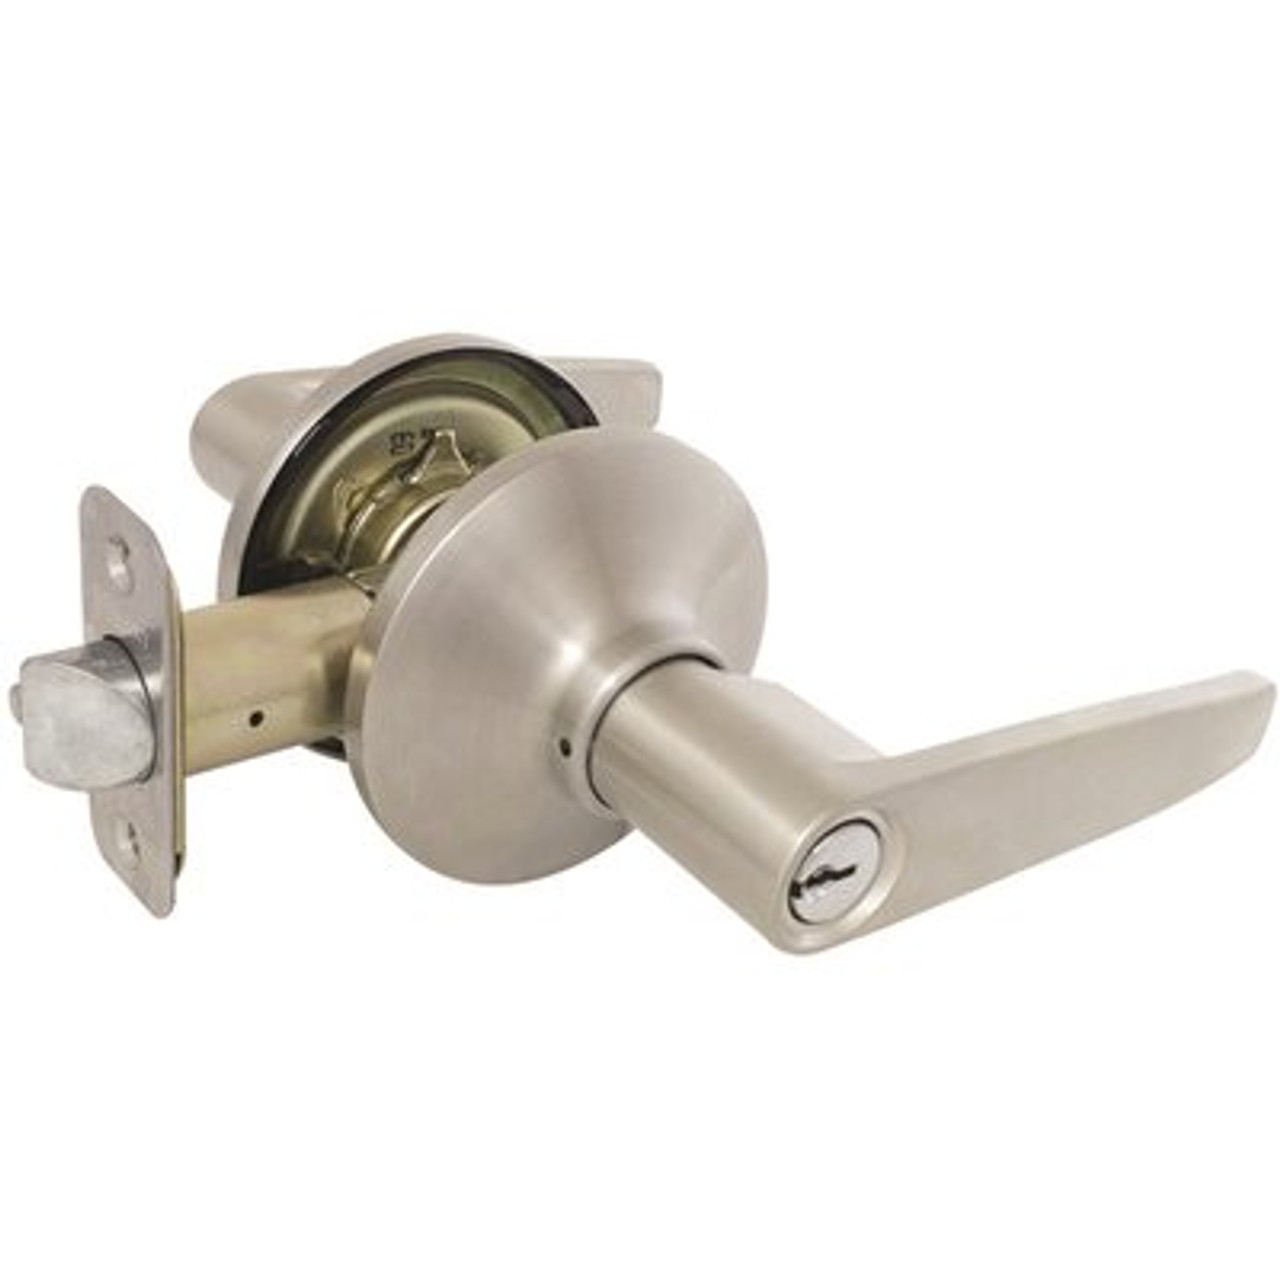 Defiant Olympic Stainless Steel Keyed Entry Door Lever With Kw1 Keyway Keyed Differently